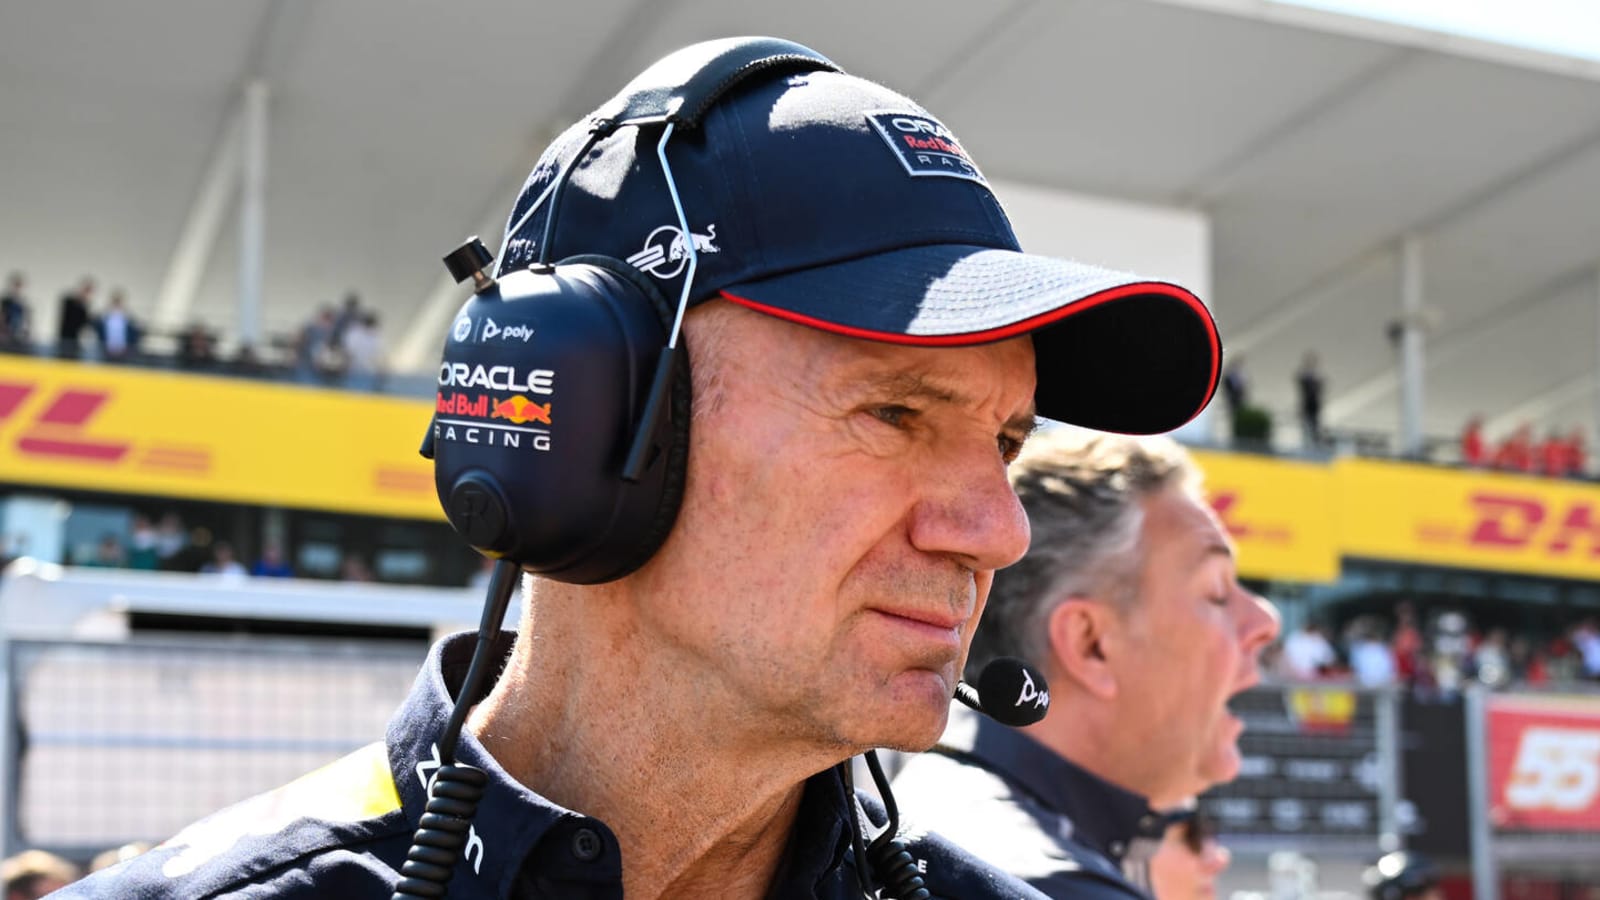 Key Red Bull Racing leader set to depart following off-track controversy